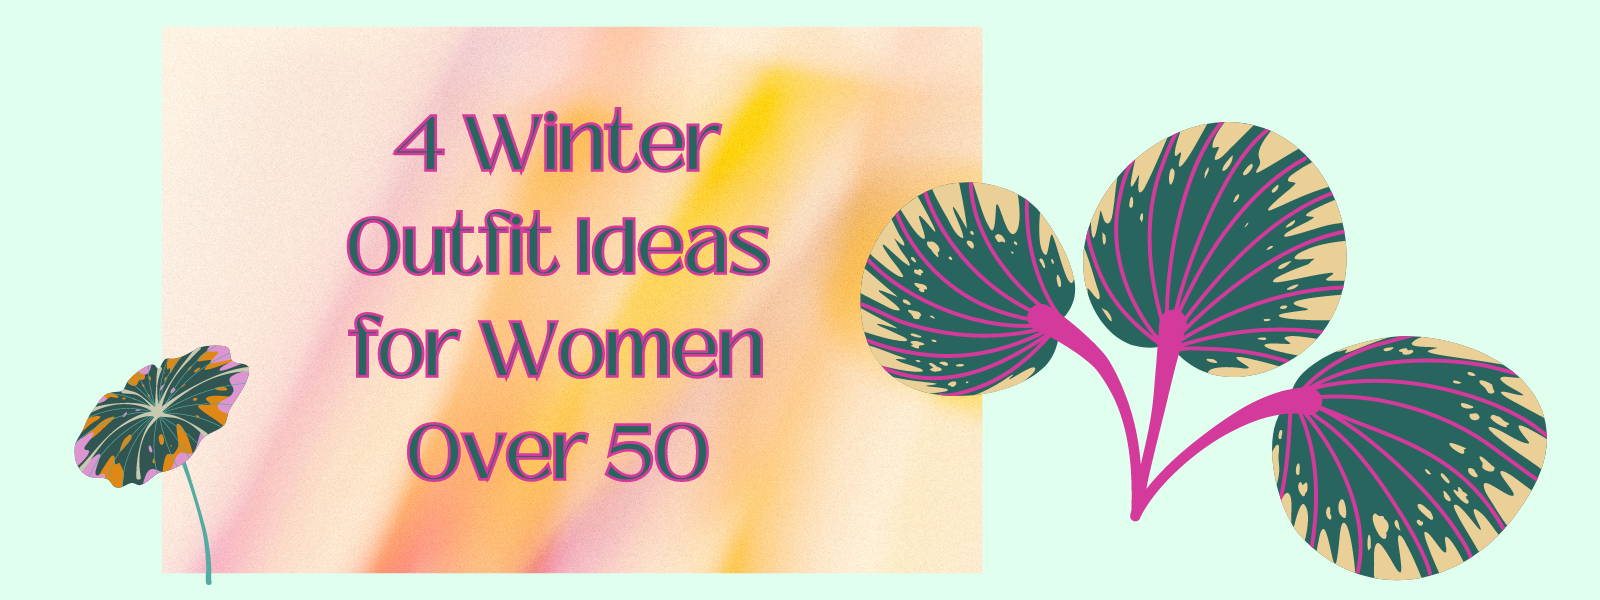 4 Winter Outfit Ideas for Women Over 50